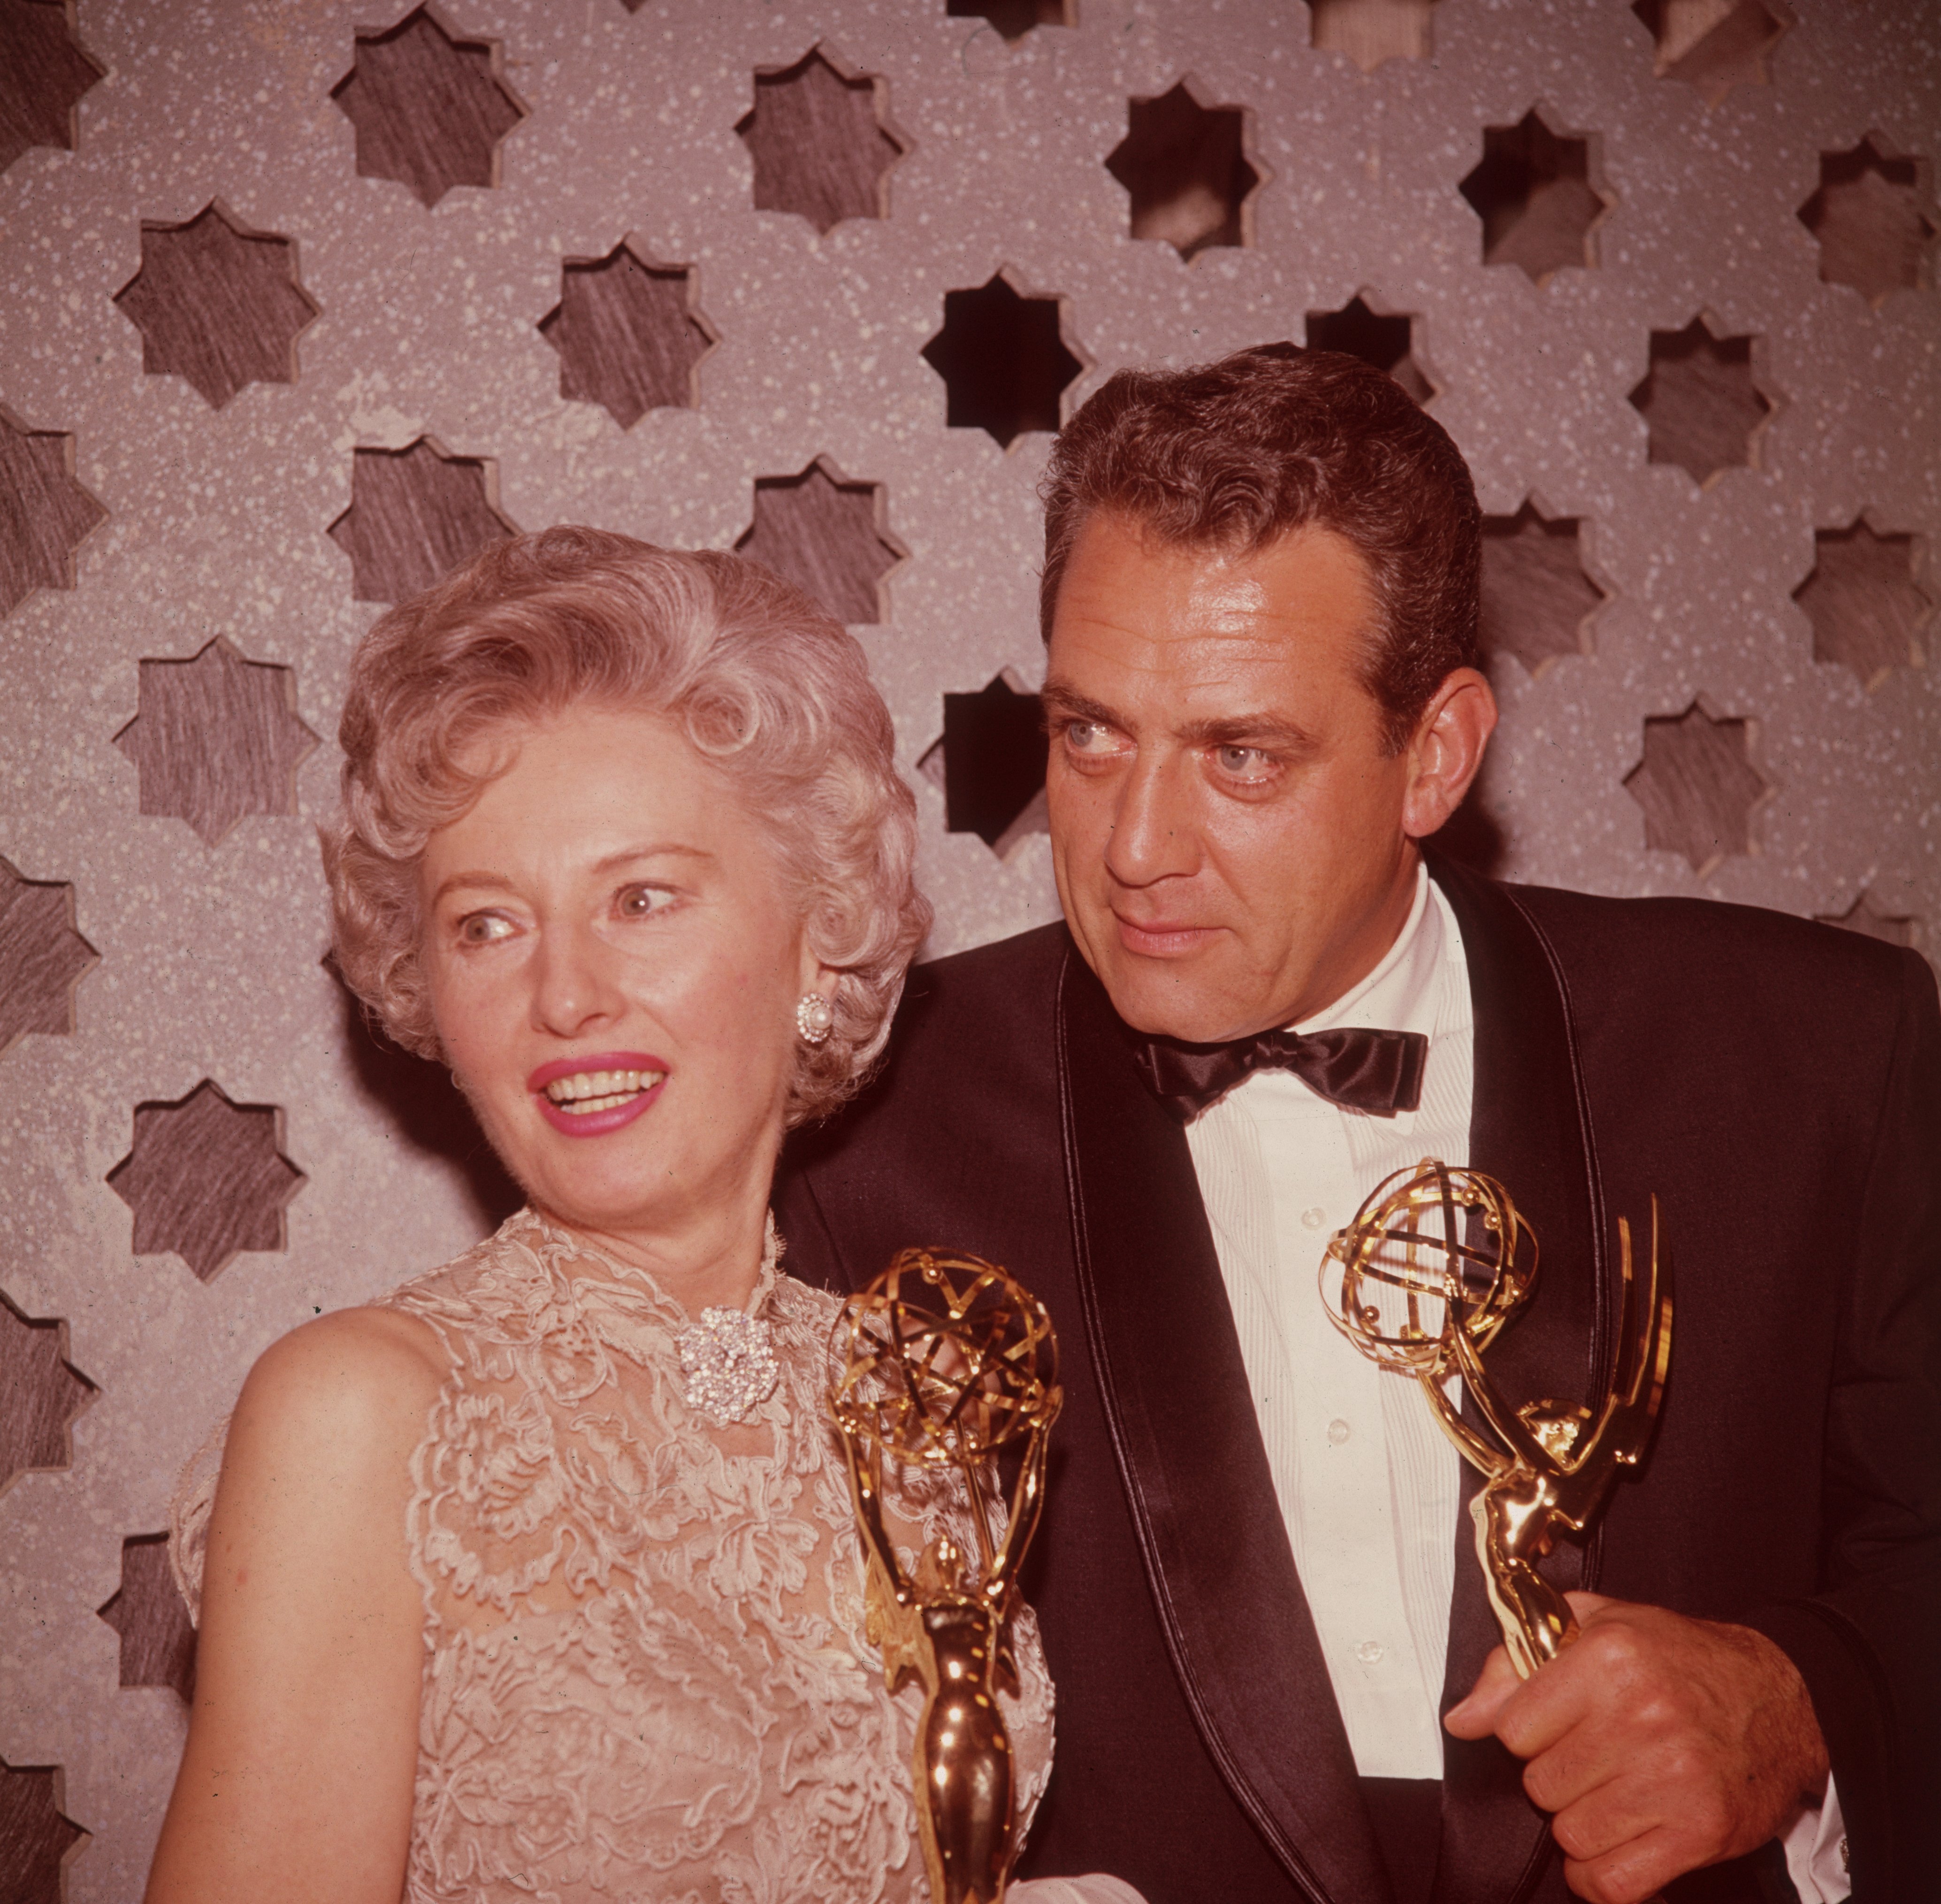 Raymond Burr and actress Barbara Stanwyck pictured holding Emmy Awards backstage in 1961. | Source: Getty Images